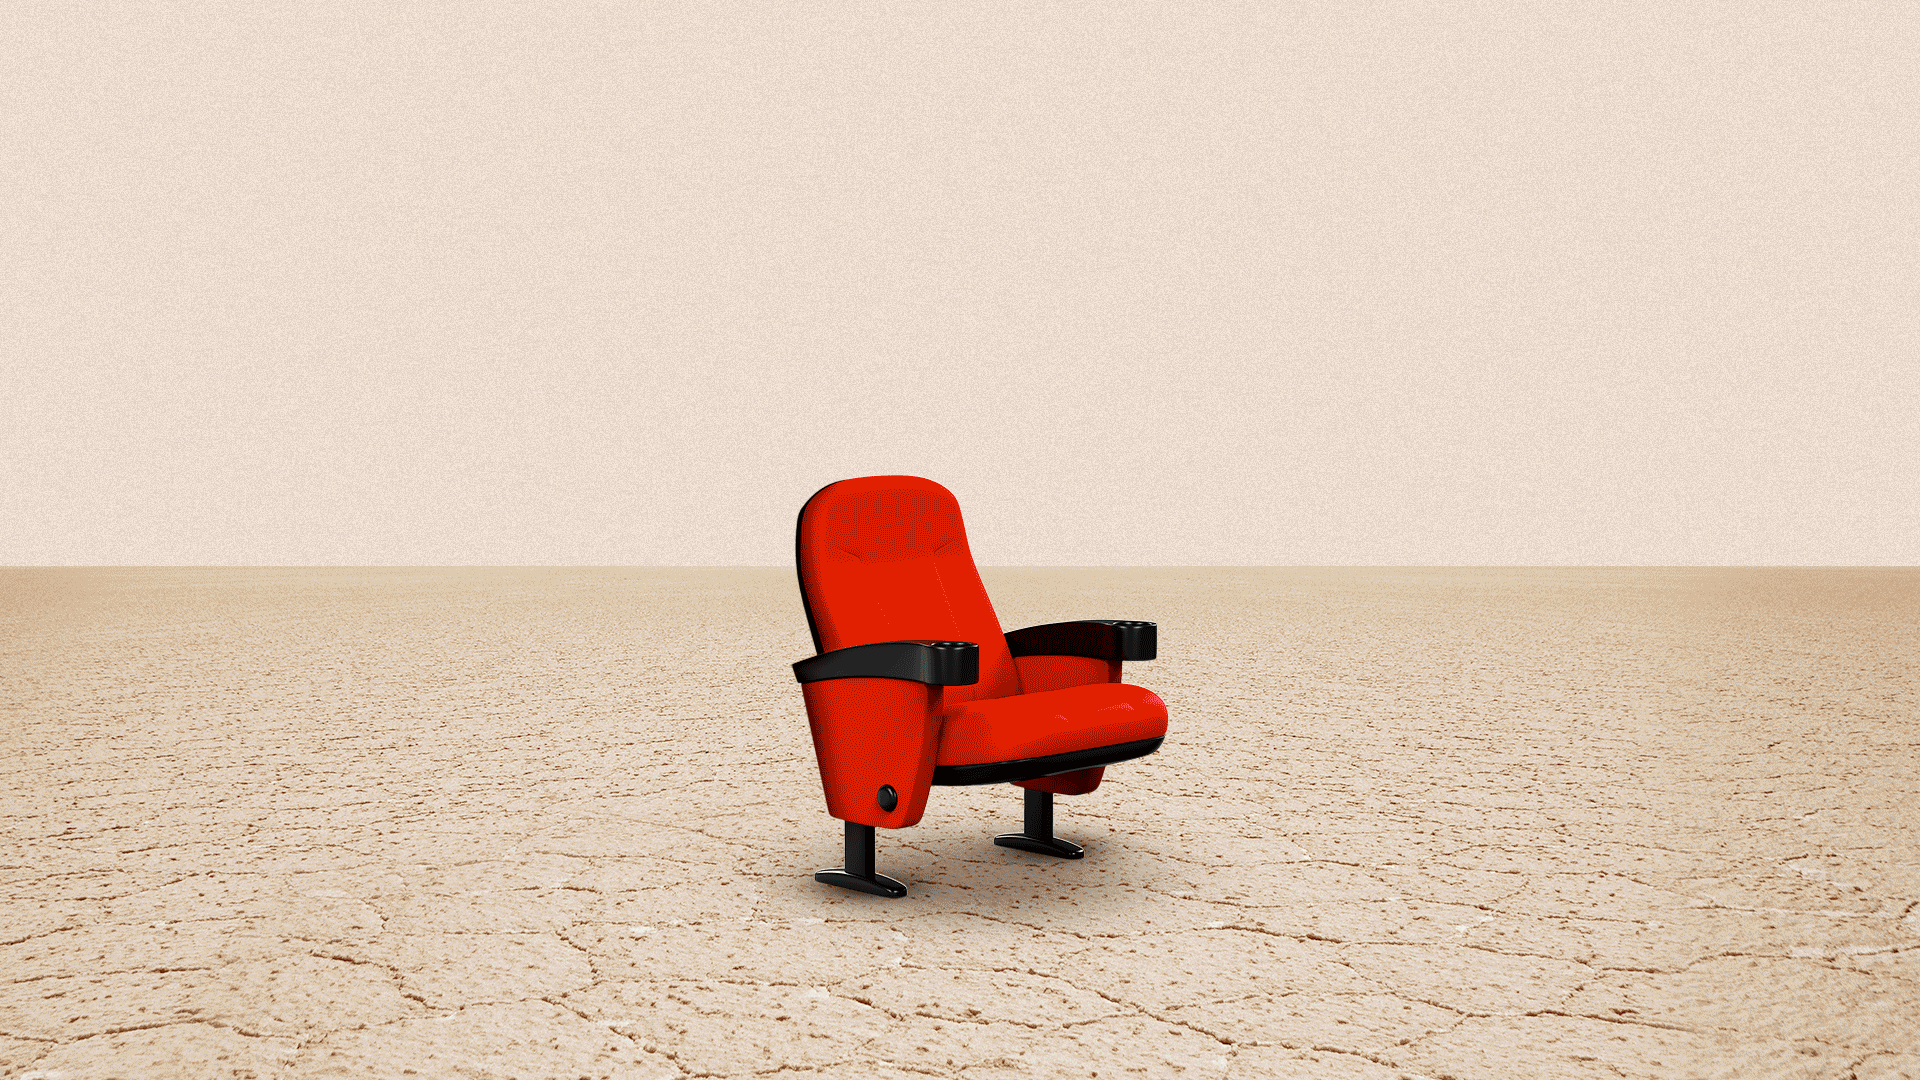 Animated illustration of a theater chair out in the desert with a tumbleweed going by. 